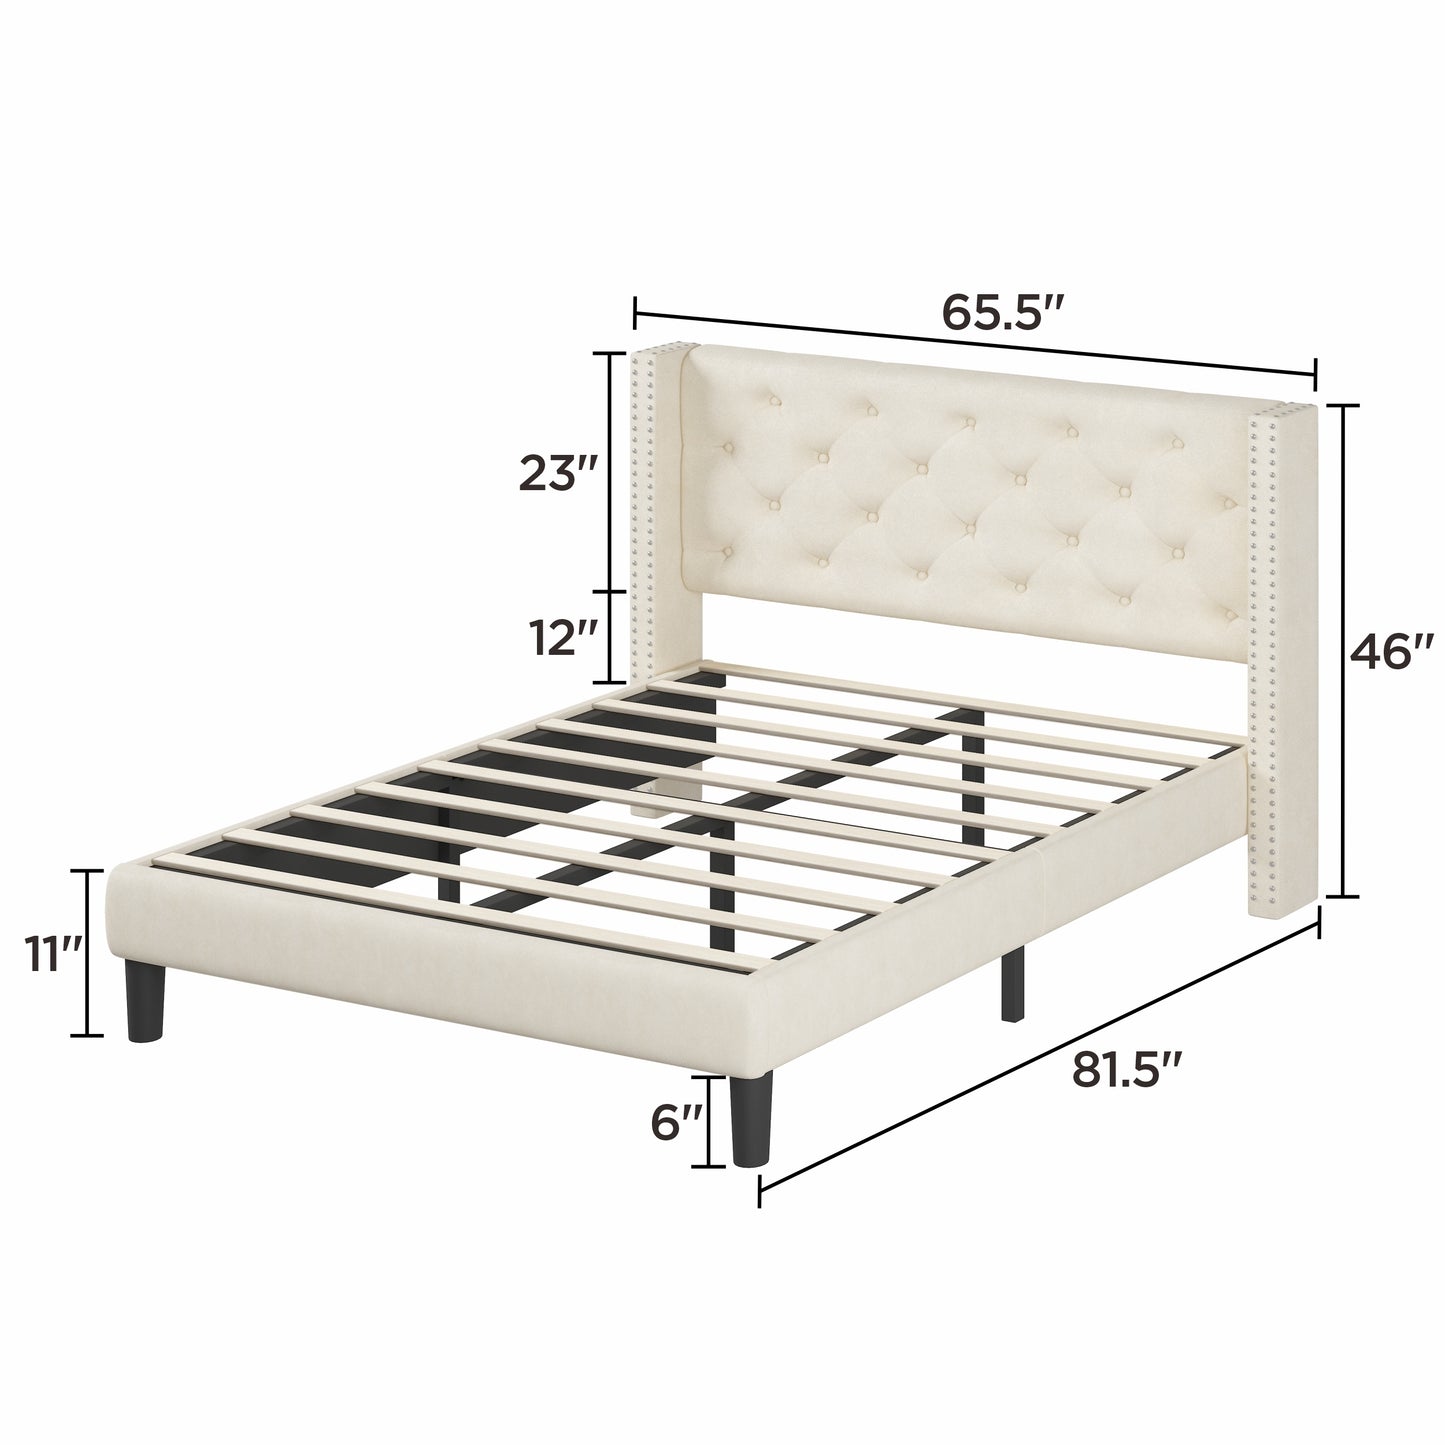 Queen Size Platform Bed with Upholstered Headboard and Slat Support, Heavy Duty Mattress Foundation, No Box Spring Required, Easy to Assemble,Beige